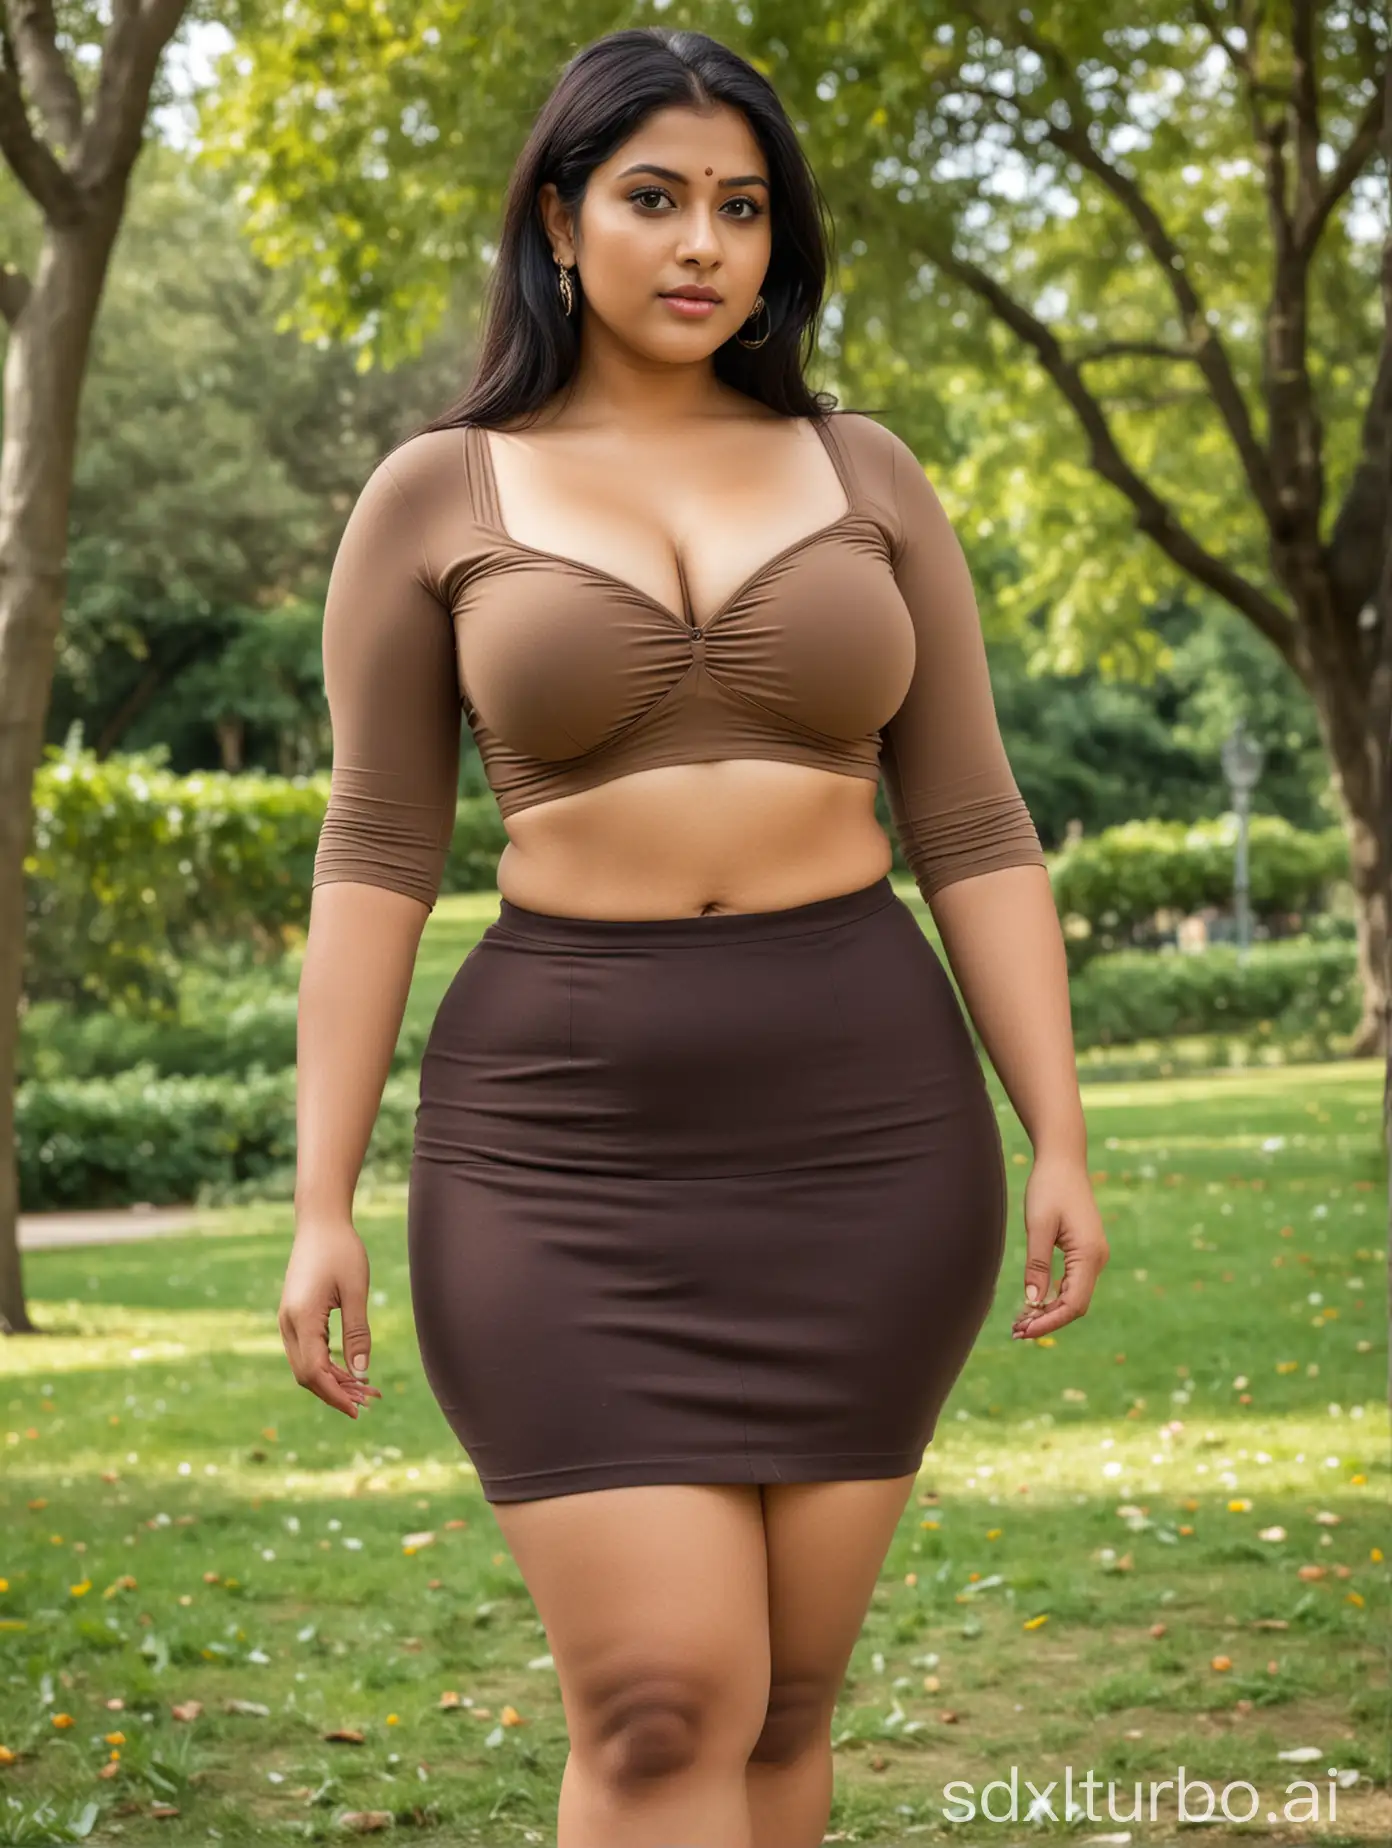 CURVY indian woman with huge breasts, with Plump female body, with tightest half sleeve mocha color crop top with deep cleavage and mini skirt, busty body, is standing at the crowded park. back view